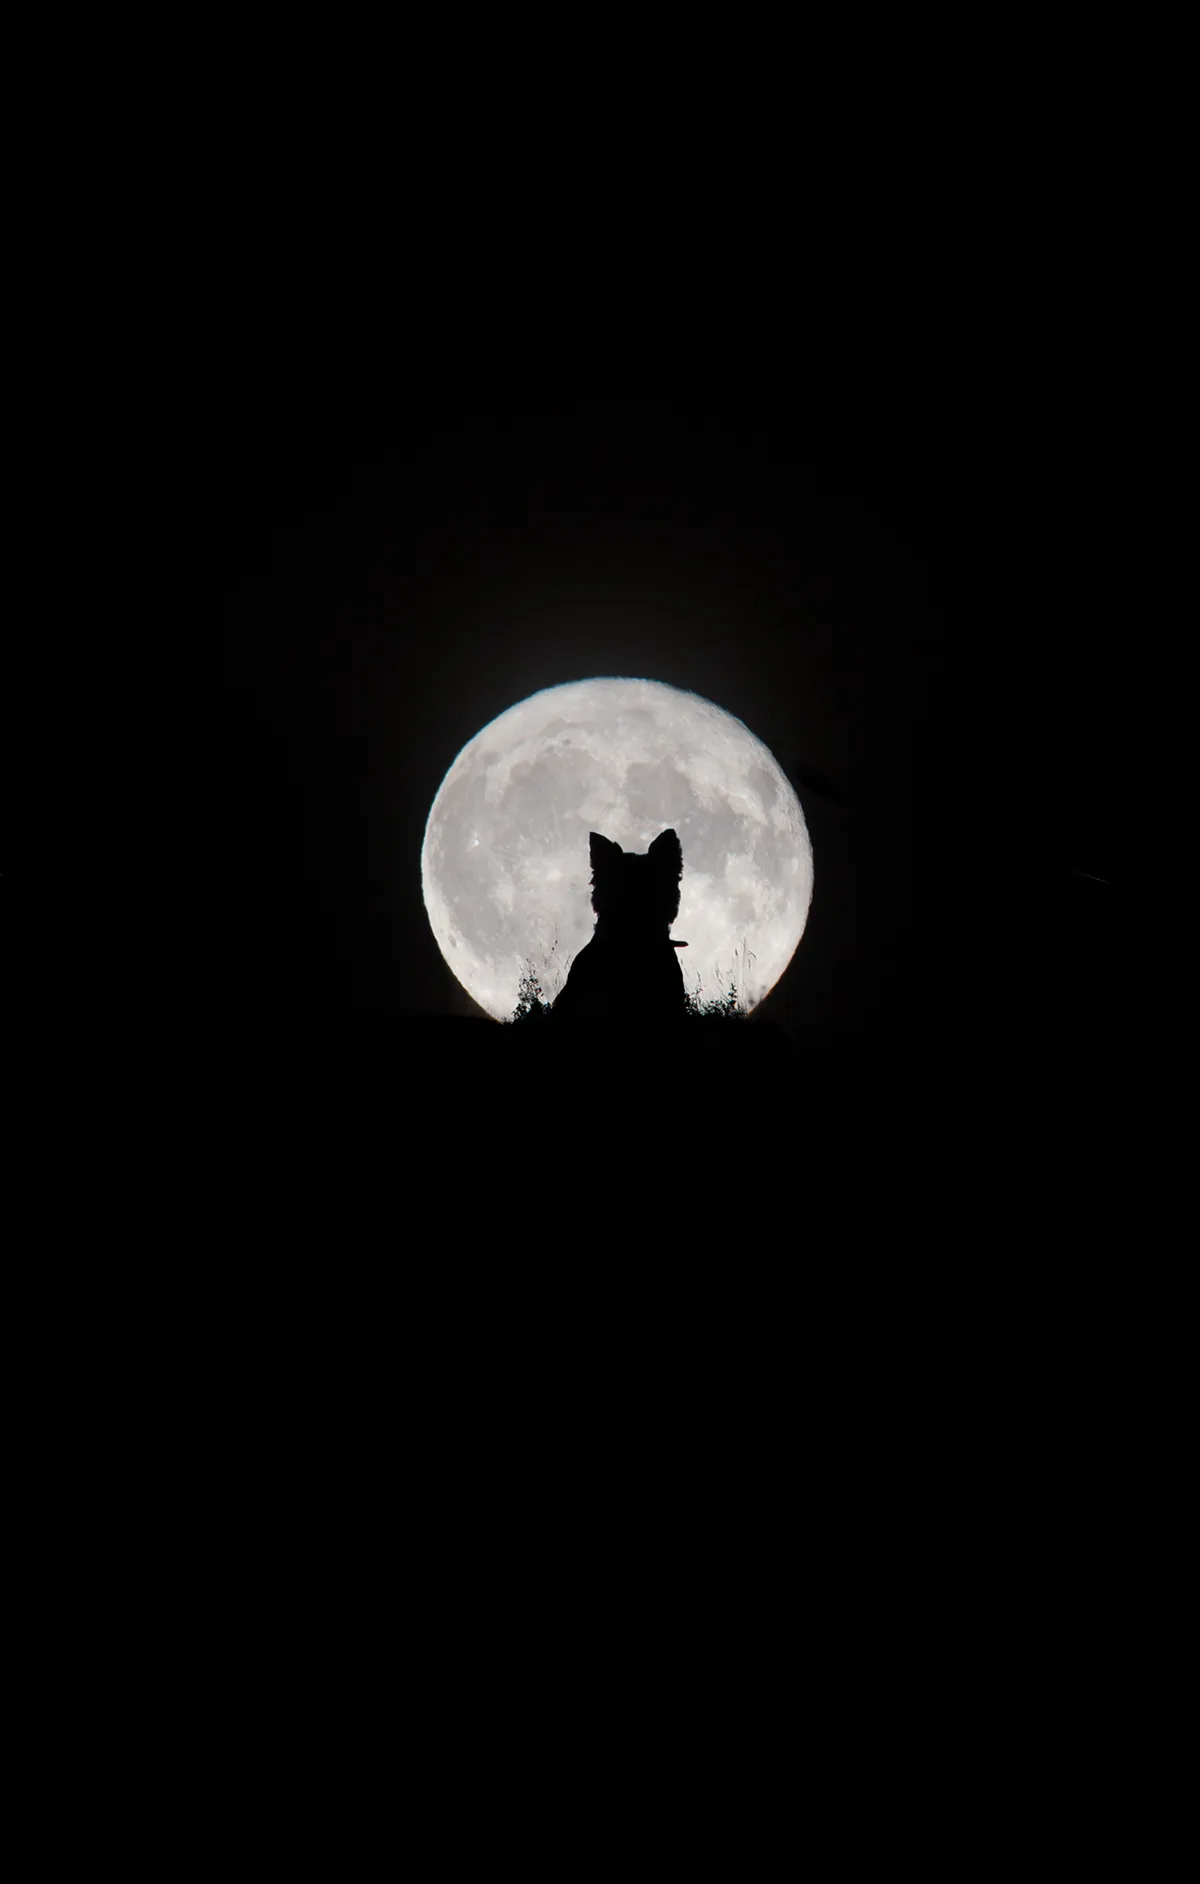 Big Moon, Little Werewolf Kirsty Paton (UK). Category: Our Moon. Equipment: Canon 6D camera, 600 mm f/13 lens, ISO 200, 1/30-second exposure